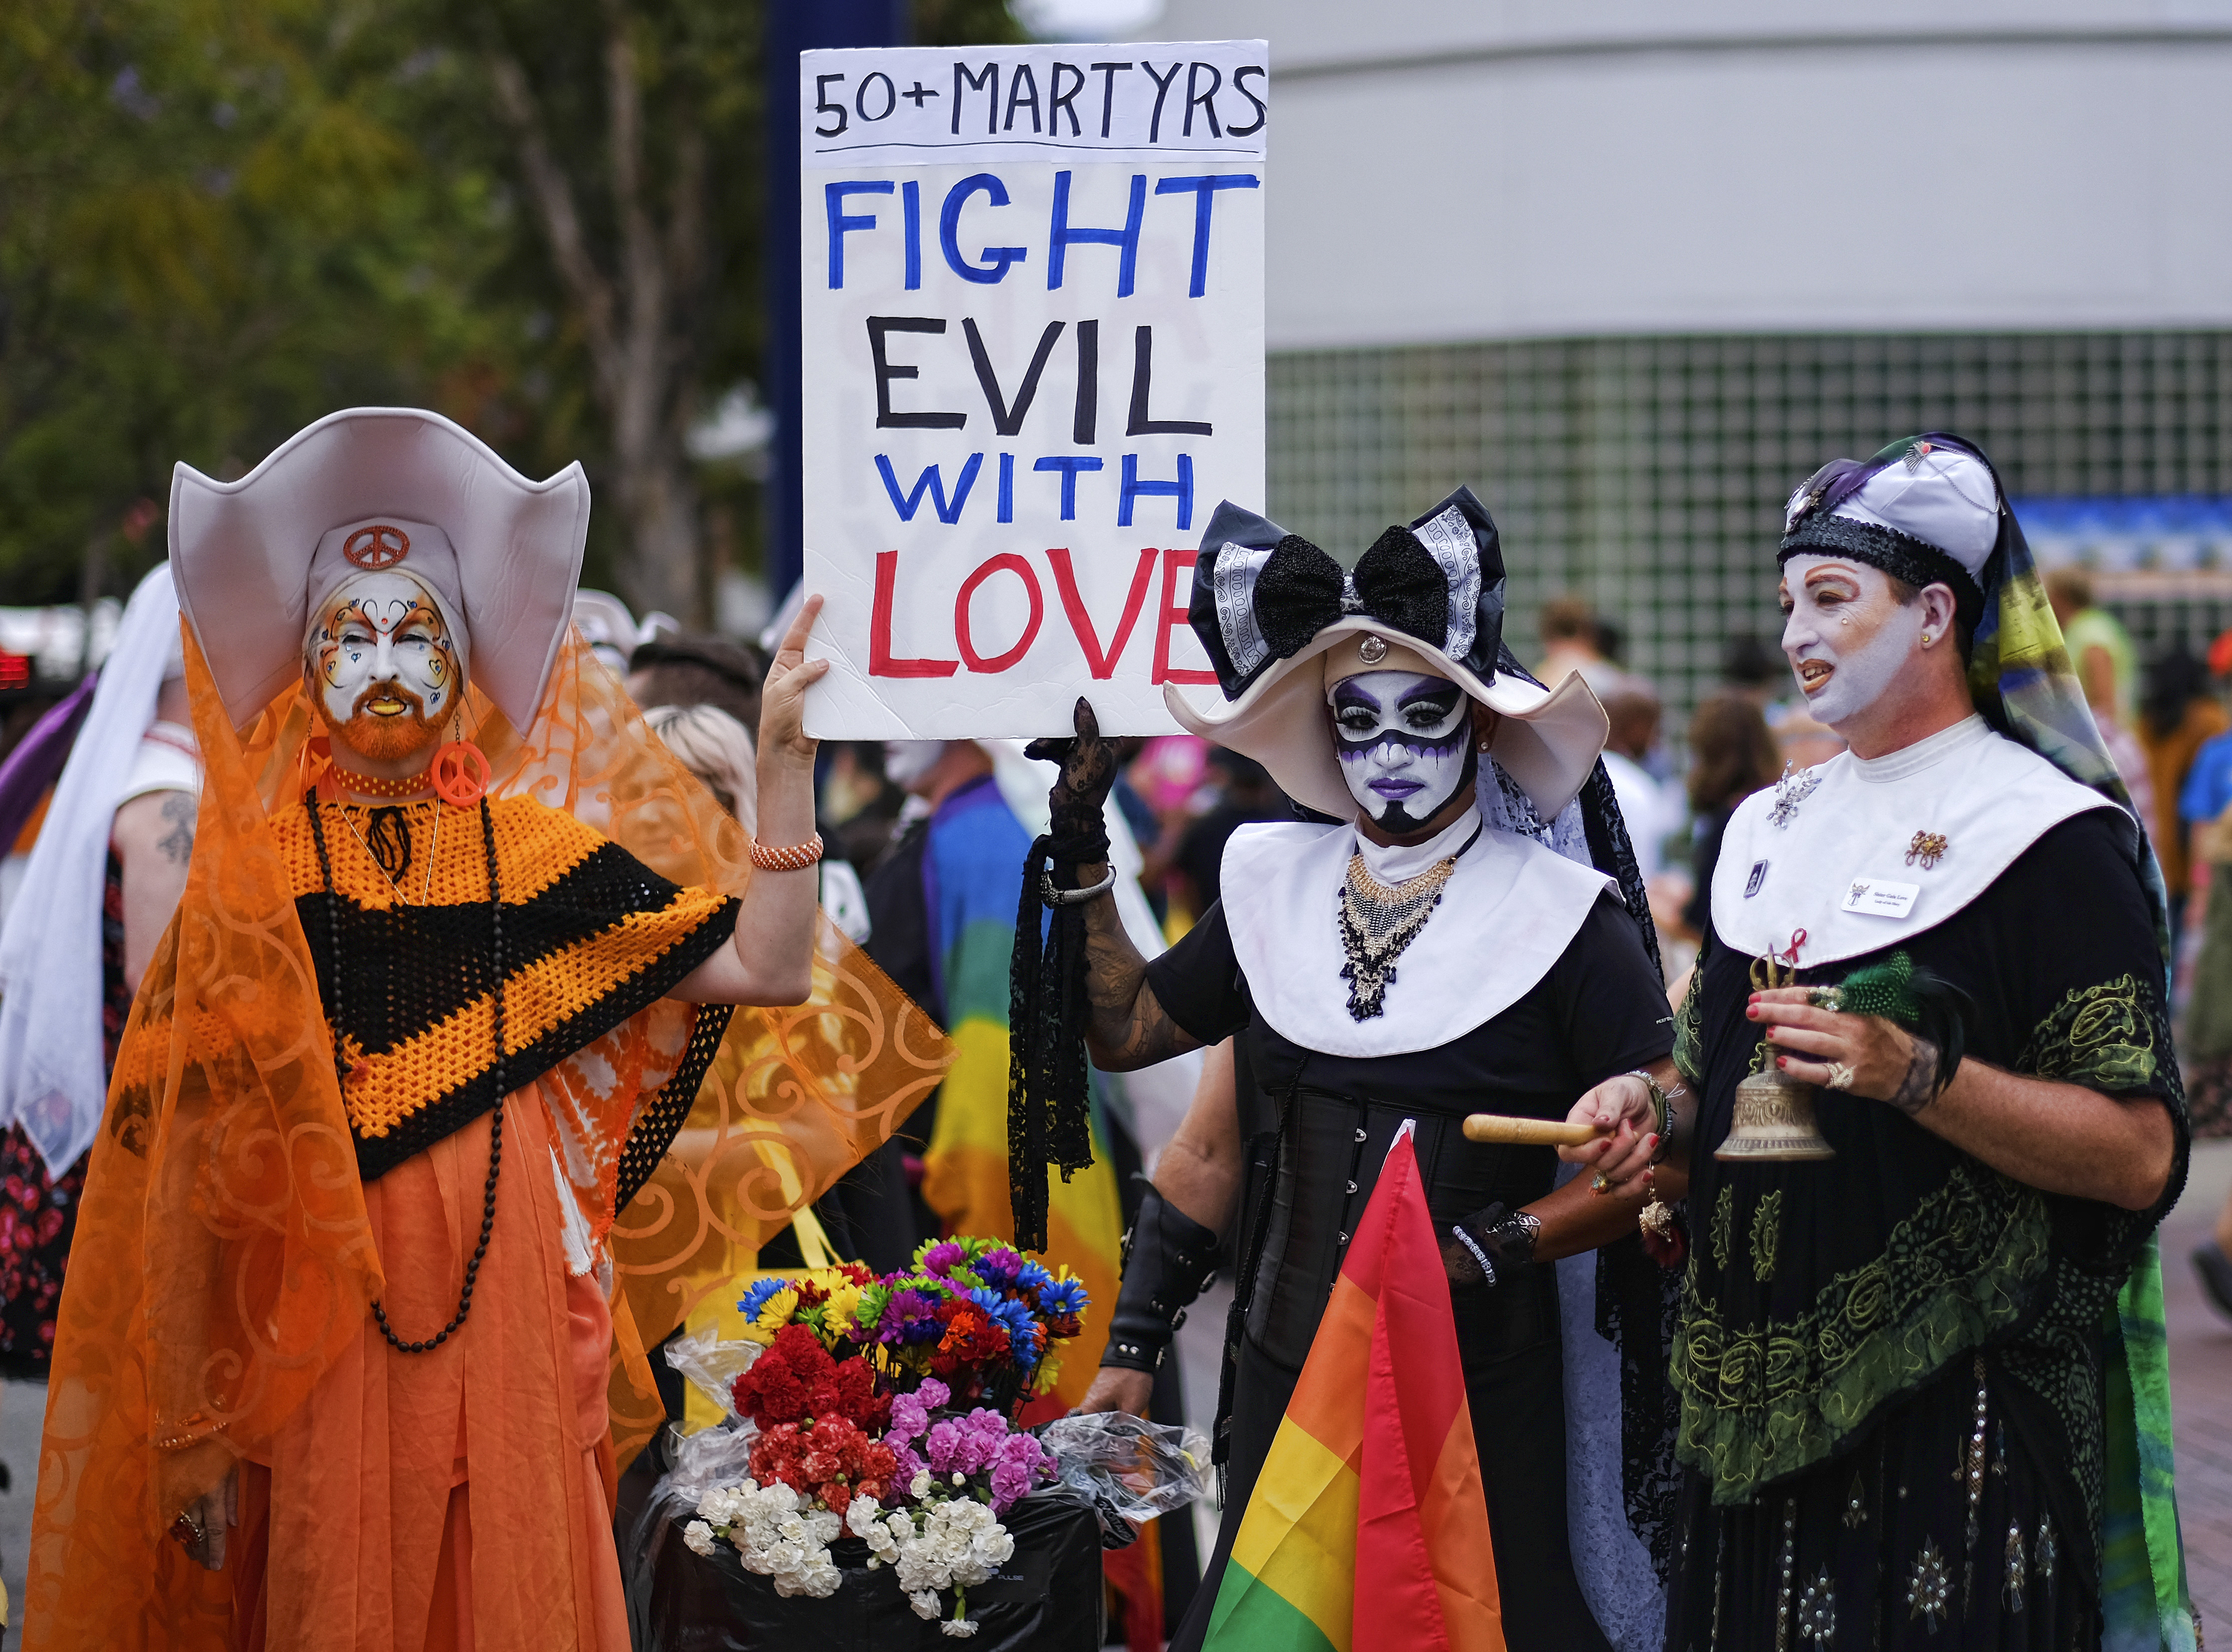 Thousands protest Sisters of Perpetual Indulgence outside Dodger